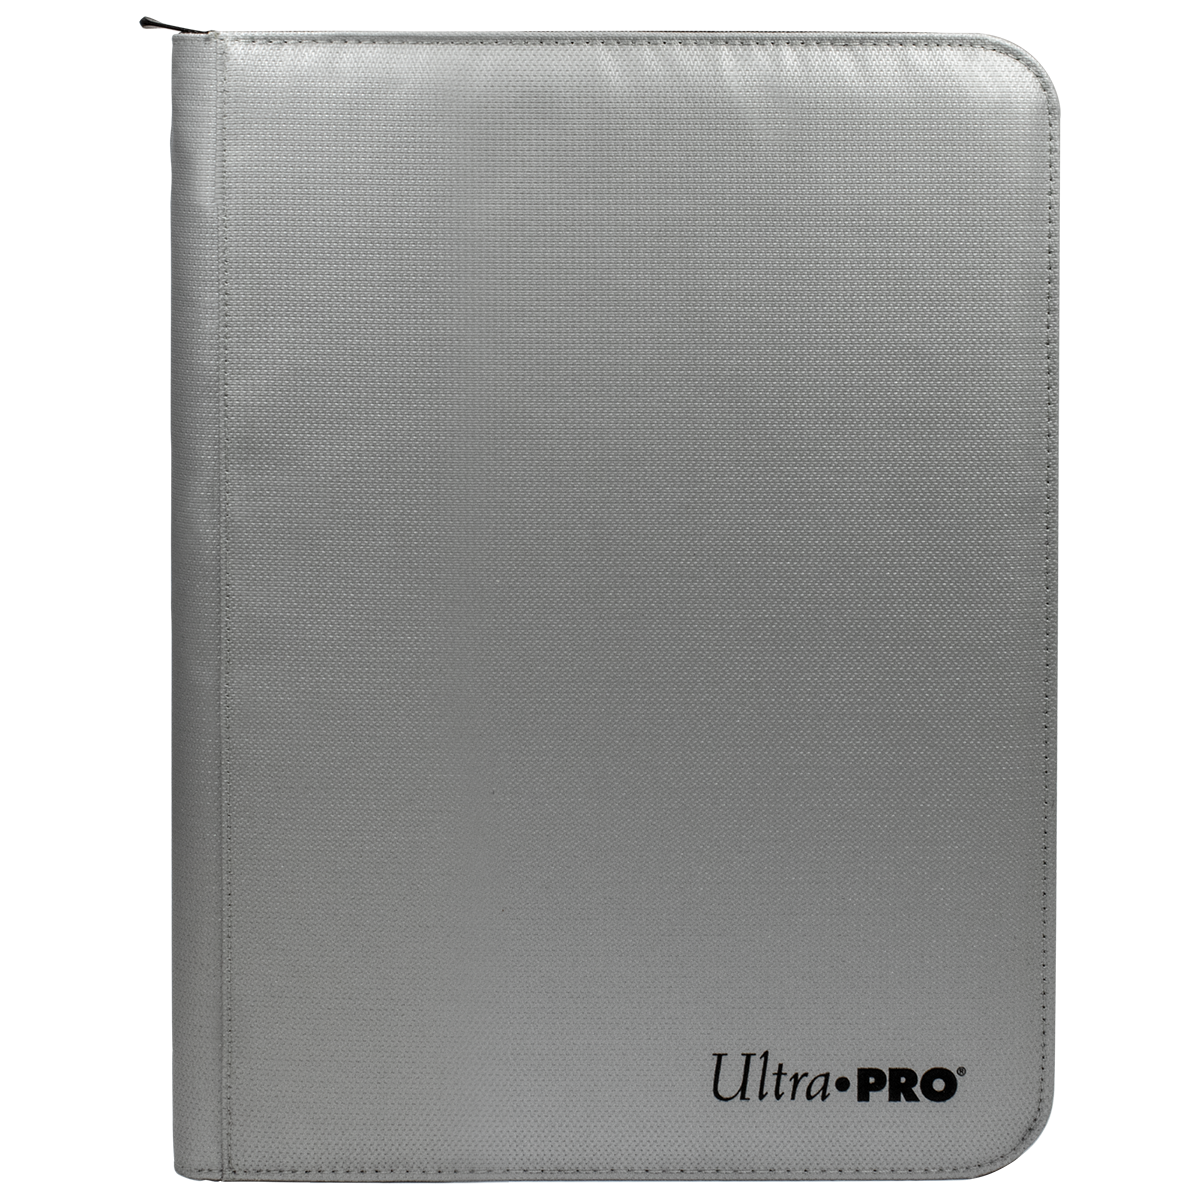 Ultra PRO 9-Pocket Zippered PRO-Binder: Silver Made With Fire